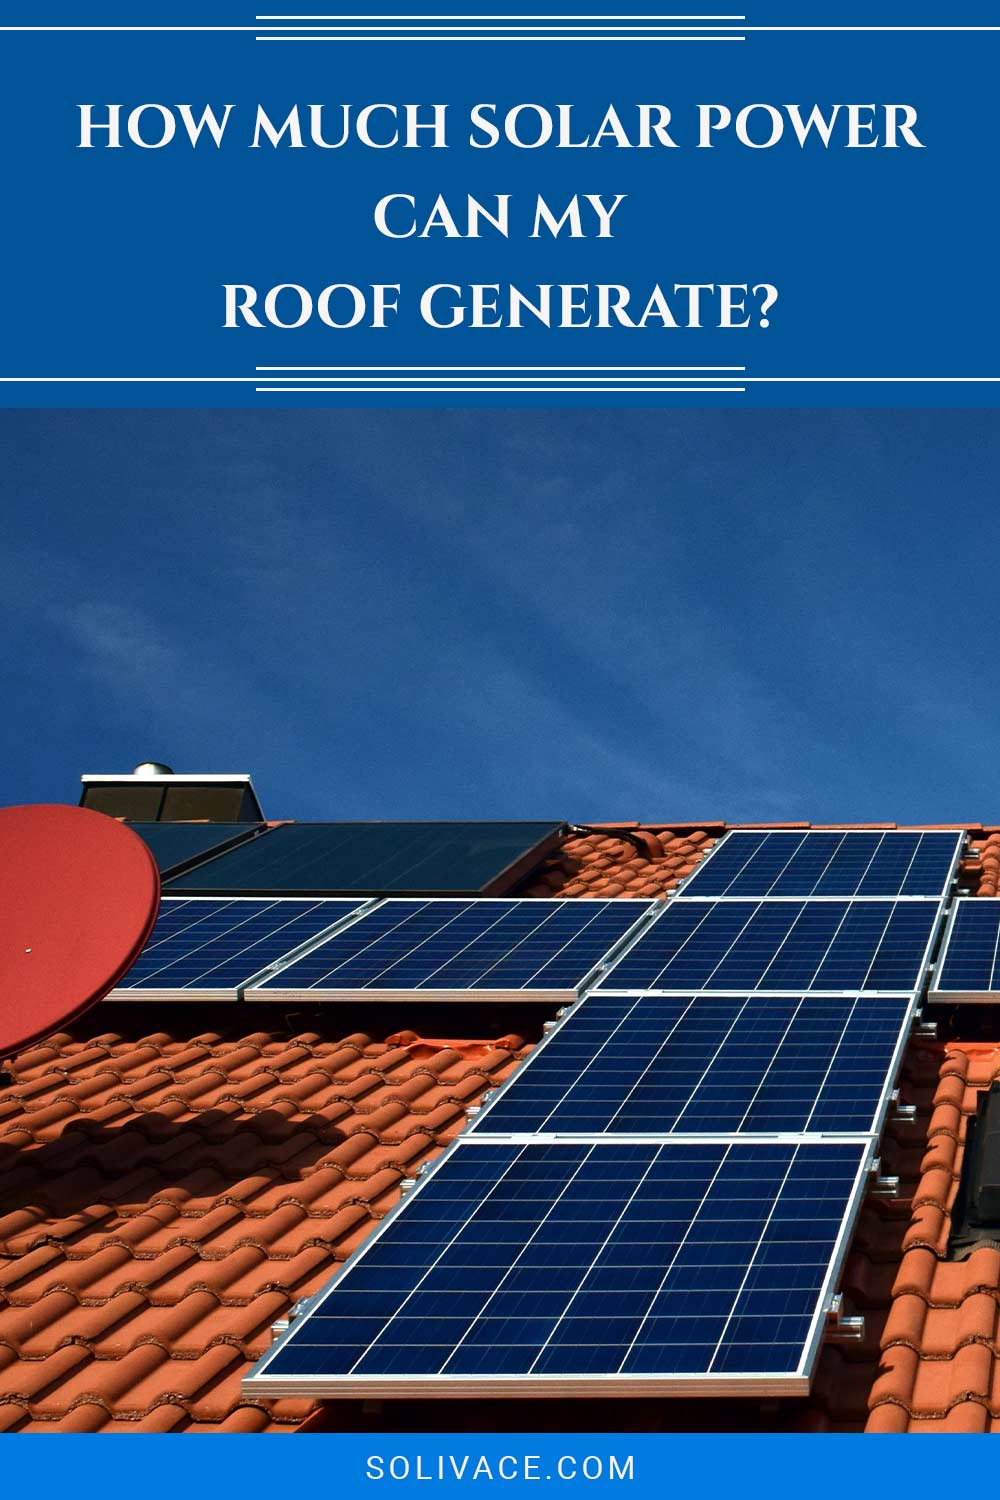 How Much Solar Power Can My Roof Generate?